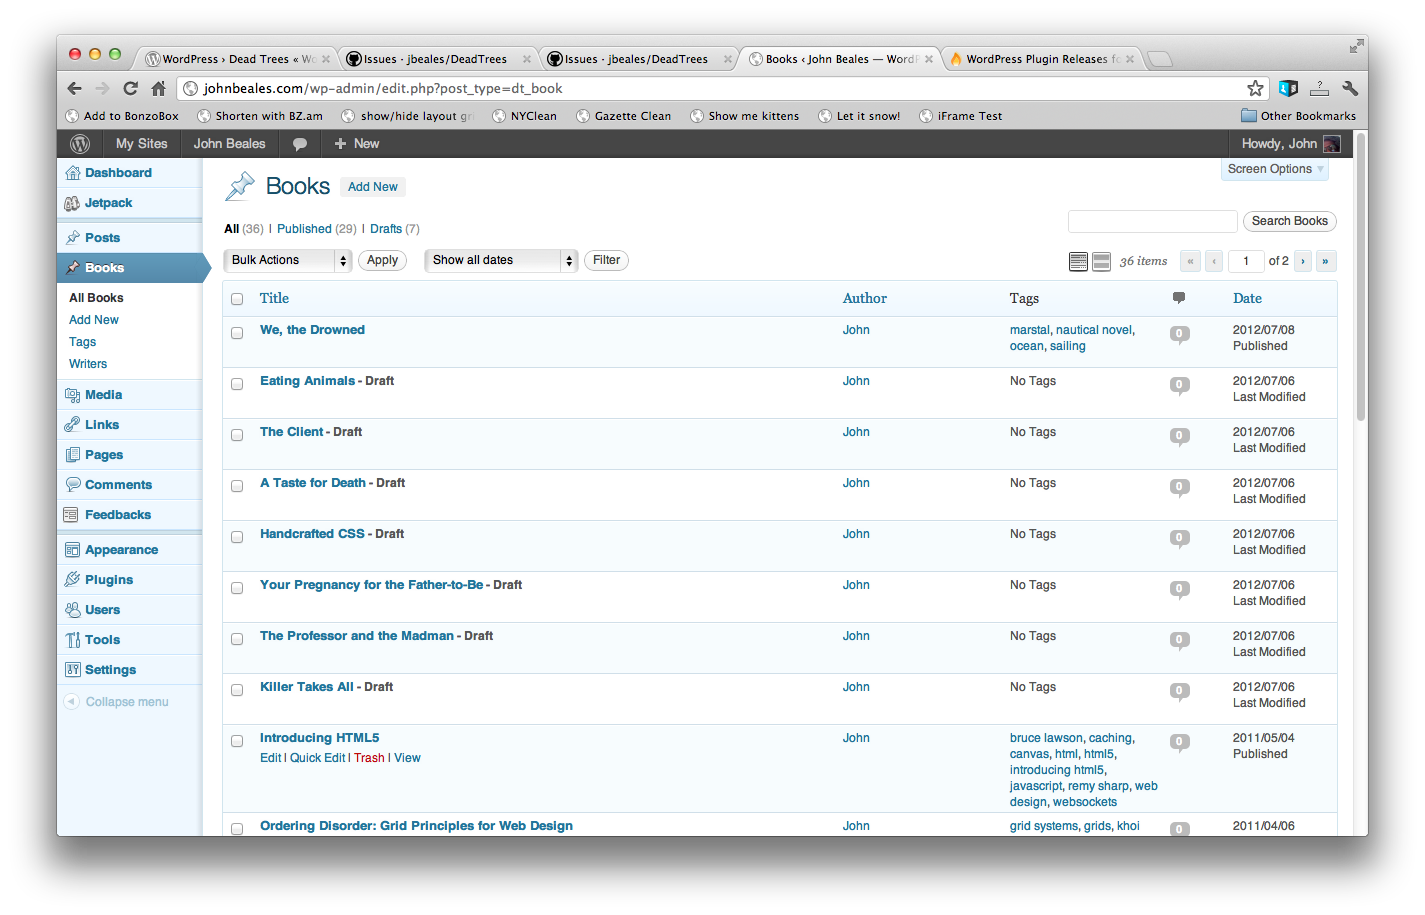 The main Books page in the WordPress admin